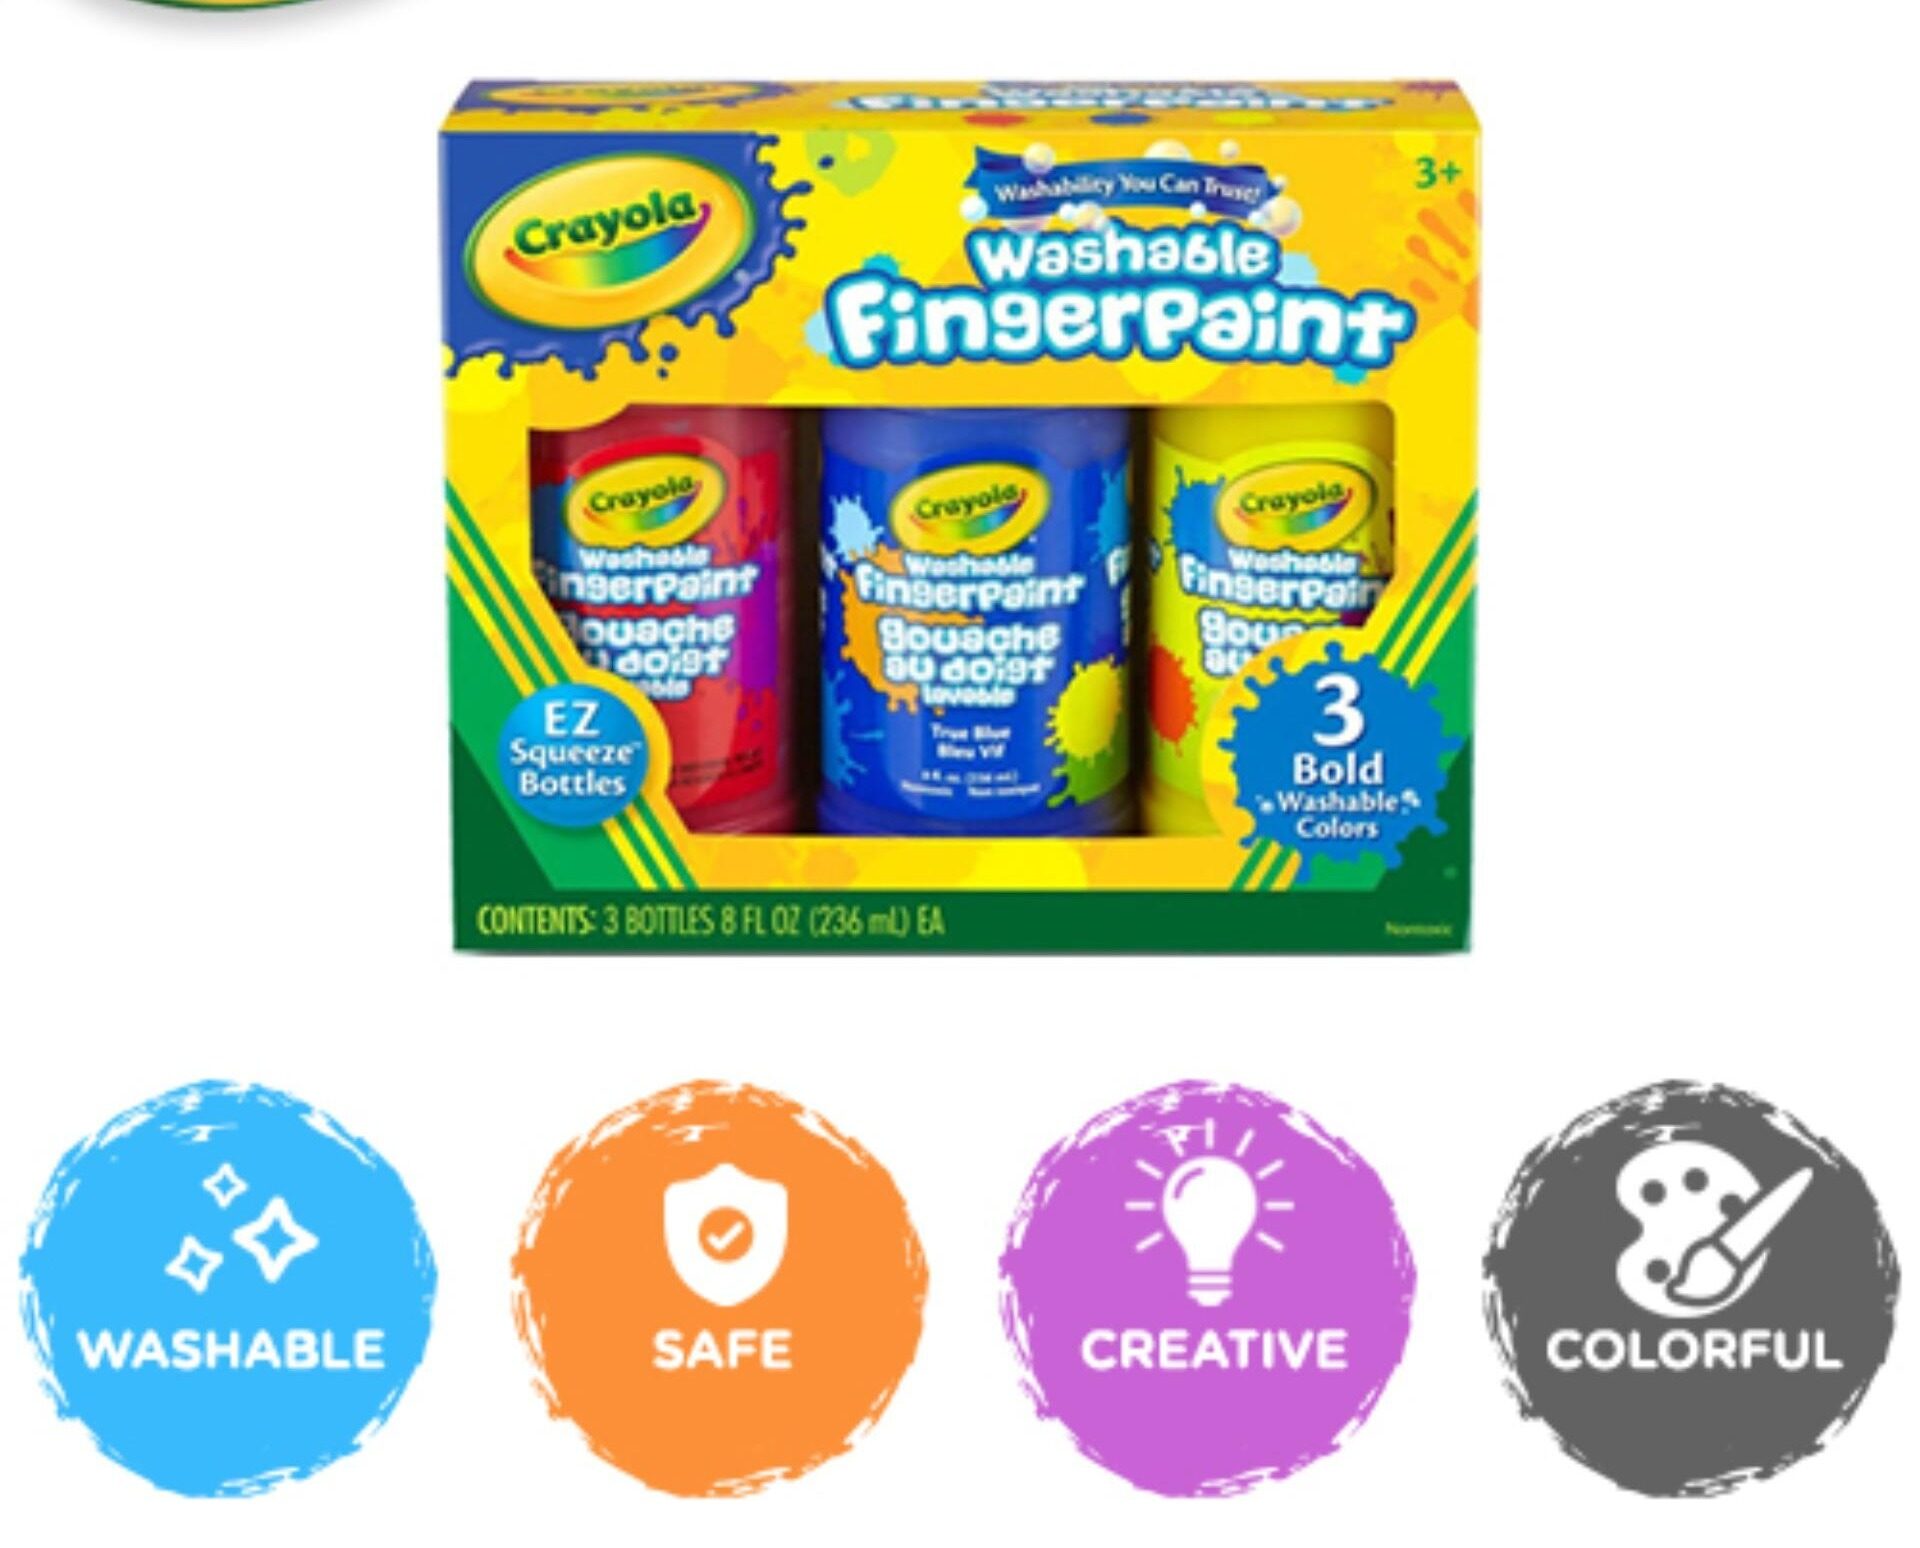 Crayola Washable Bold Fingerpaint Primary Colors 3 CT Easy Clean Up Finger Painting Gift Age 0 to 3